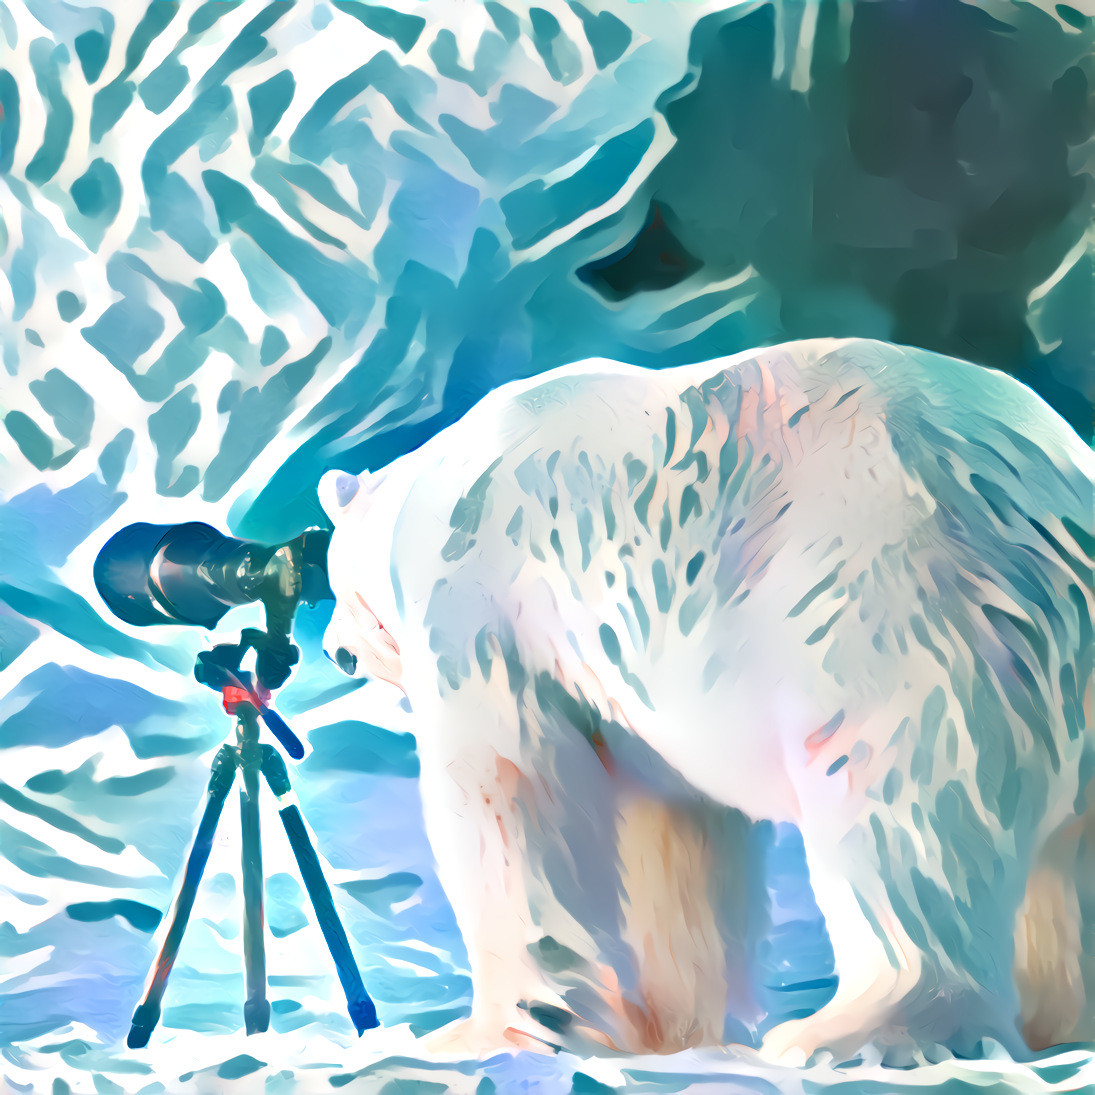 photographing bear